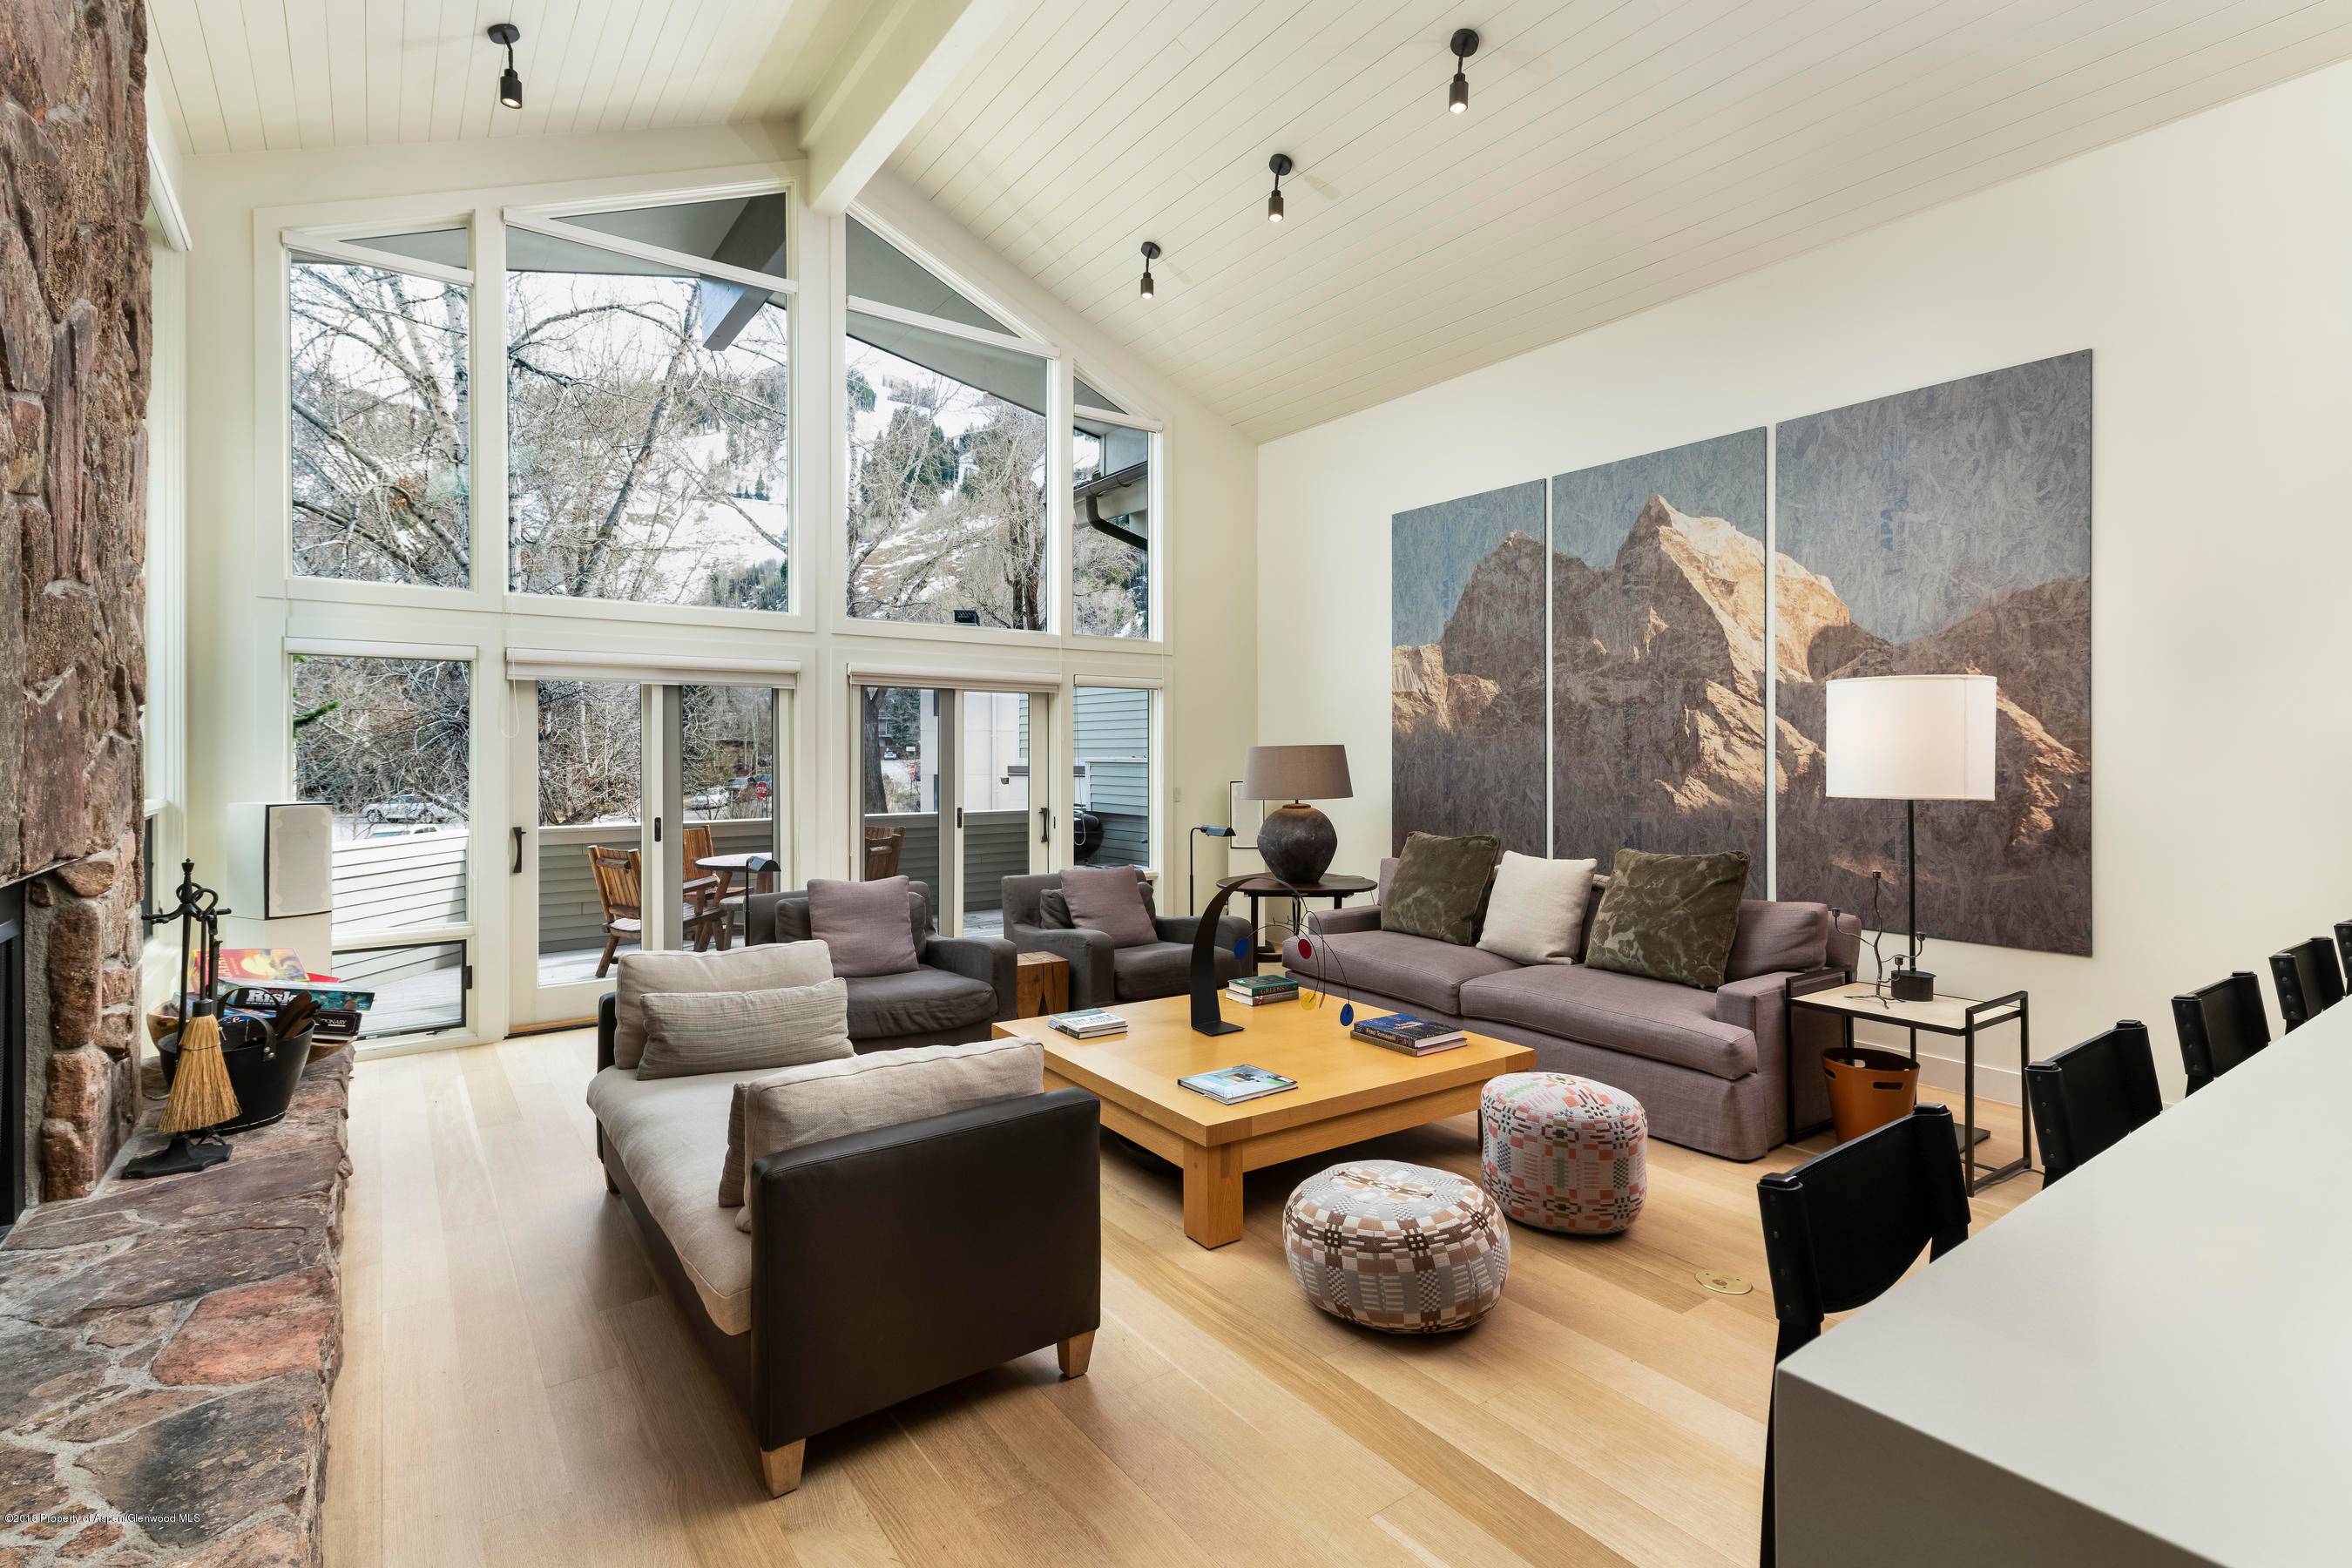 Walk to shopping, dining, hiking, and skiing from this six bedroom, six bathroom residence in downtown Aspen.